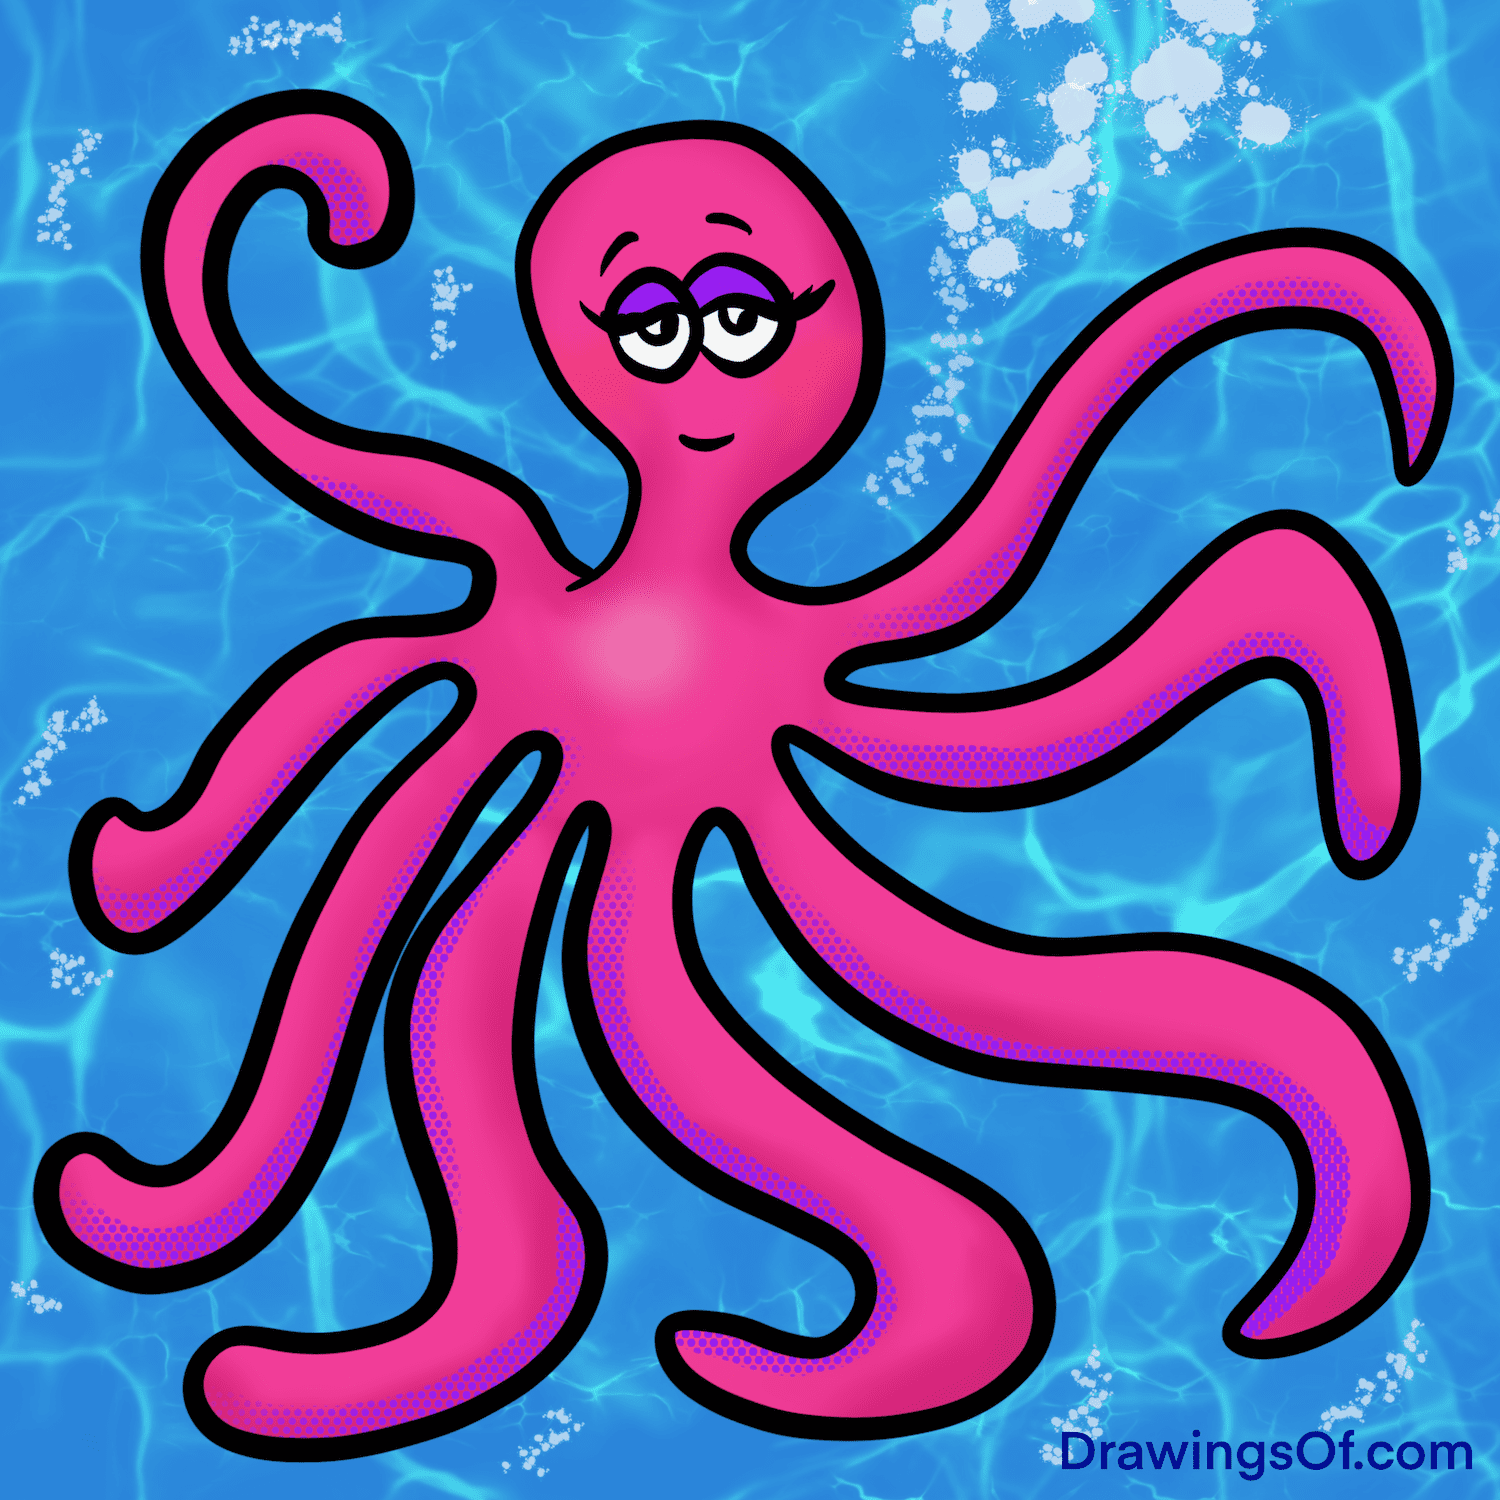 Octopus drawing easy